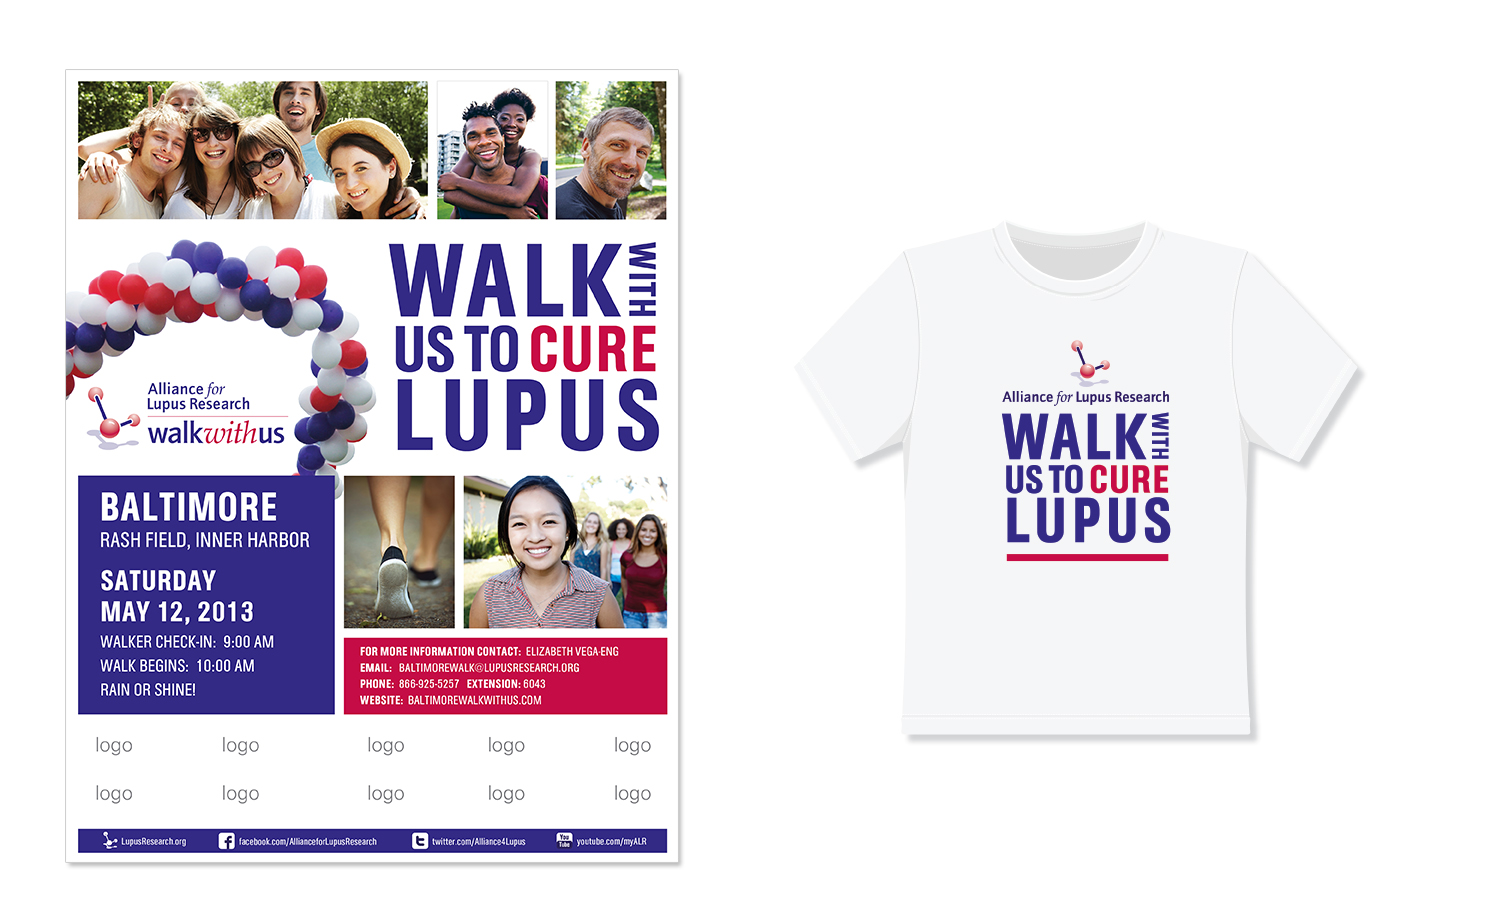 Alliance for Lupus Research Walk Program Support Materials